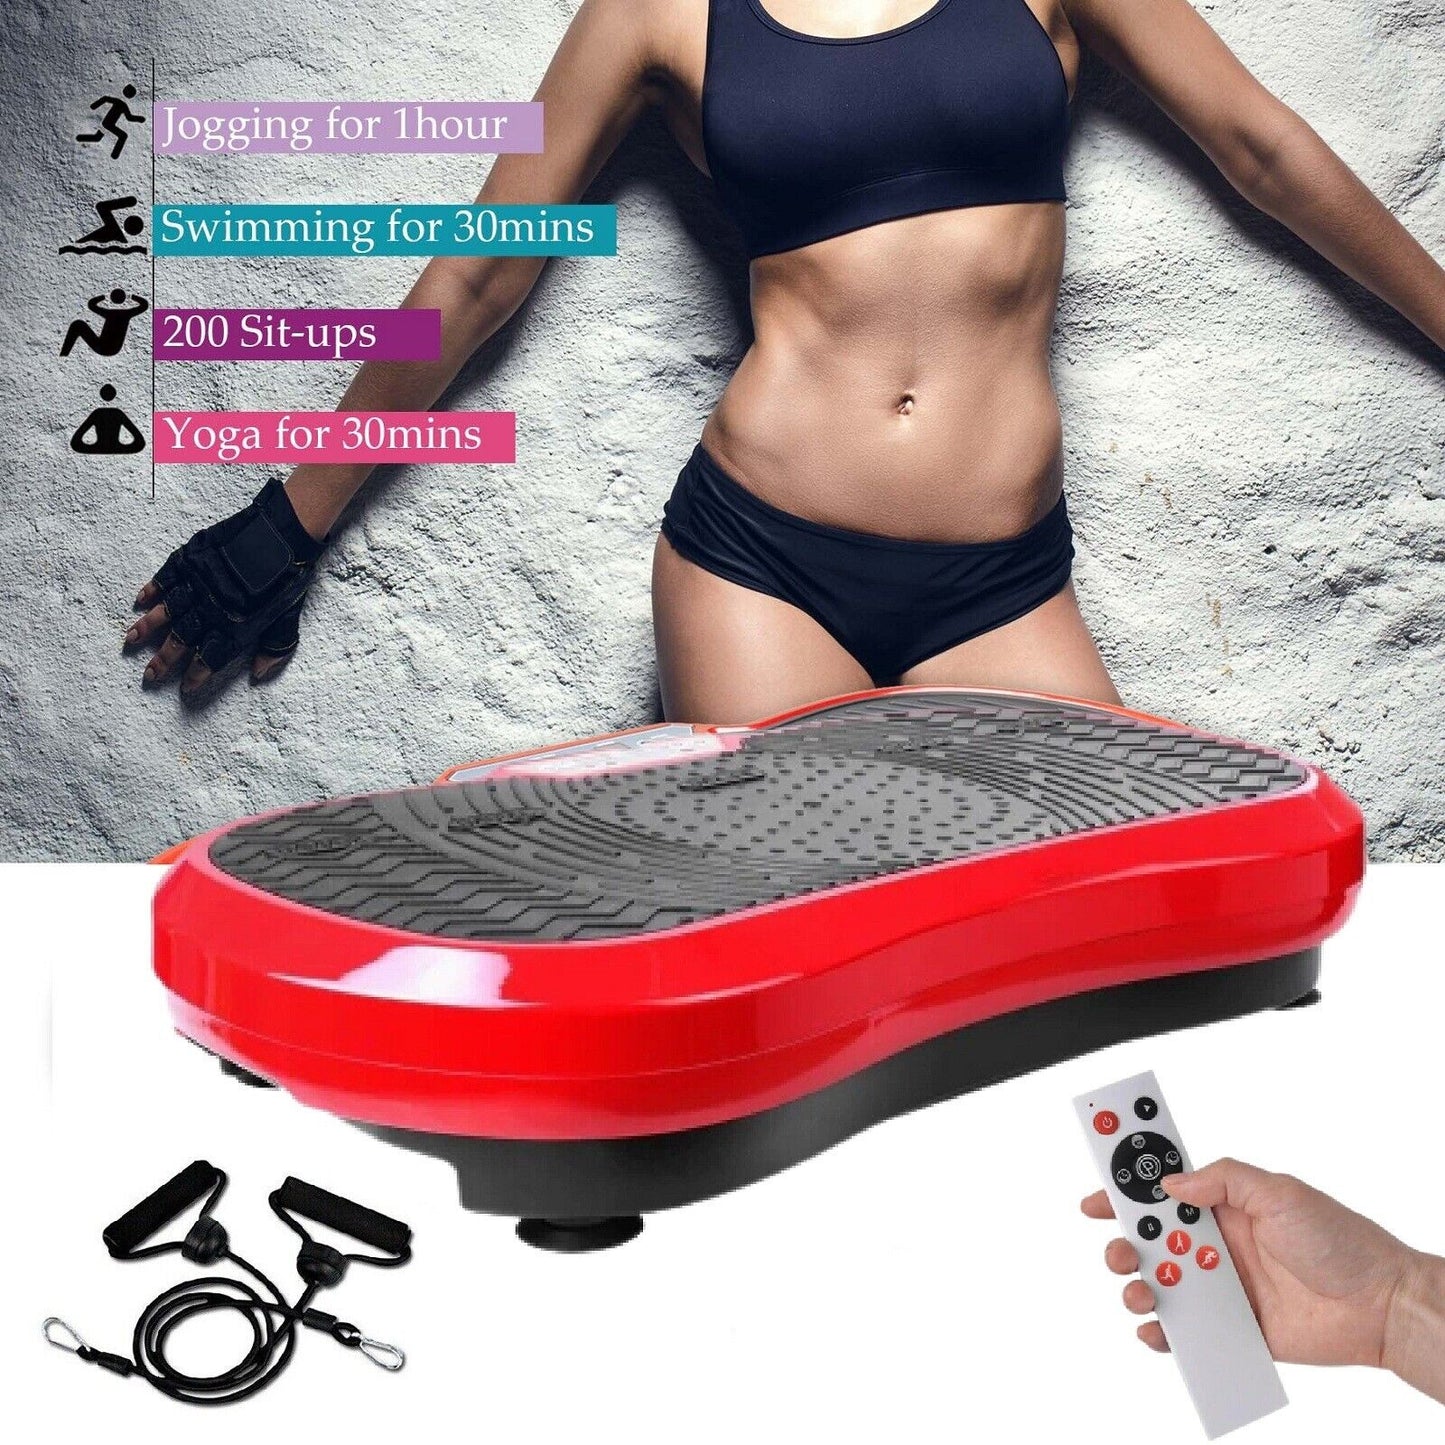 Compact Portable Vibration Machine for Weight Loss & Toning - Get Fit Home Machine Pack with Bands